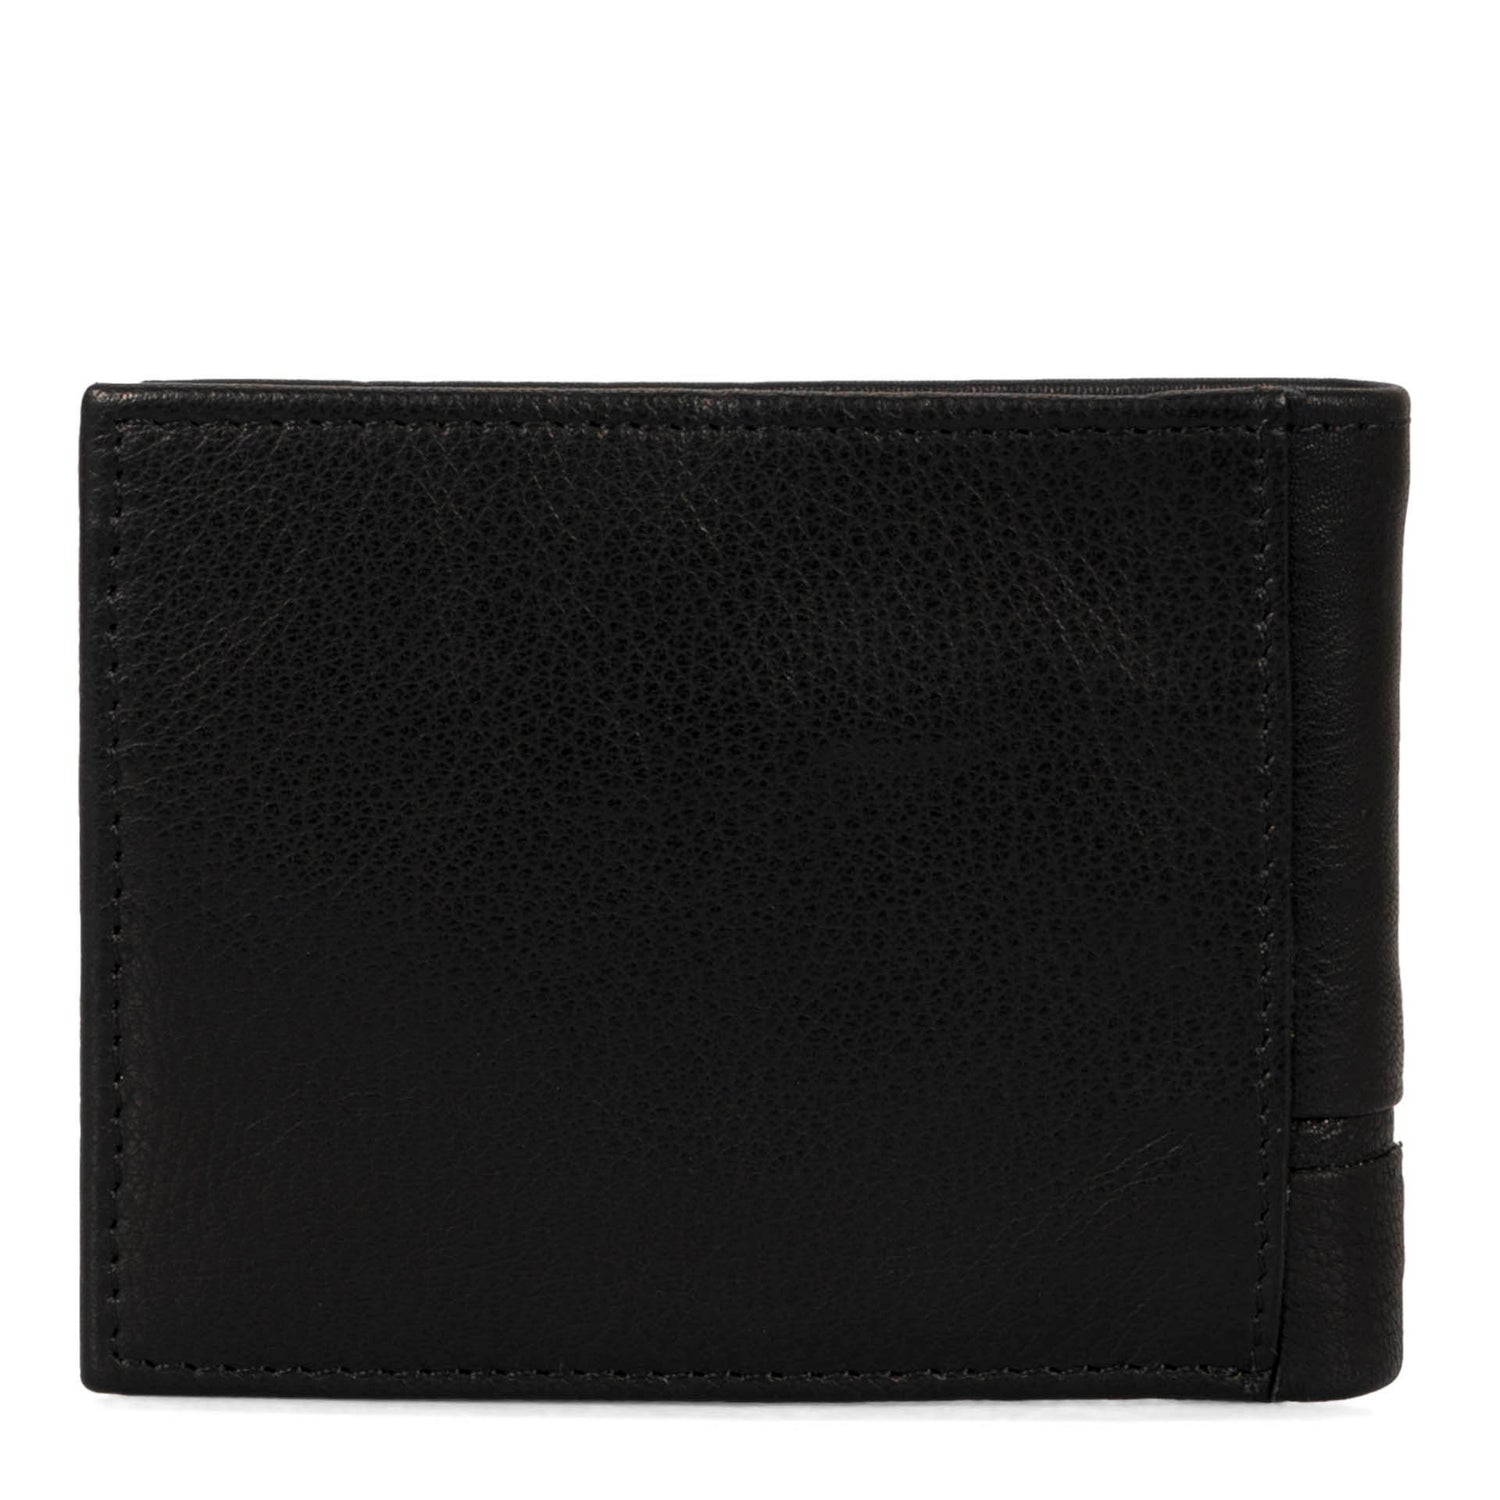 Back side of a black wallet called Calwood designed by Tracker, showcasing a soft leather texture.